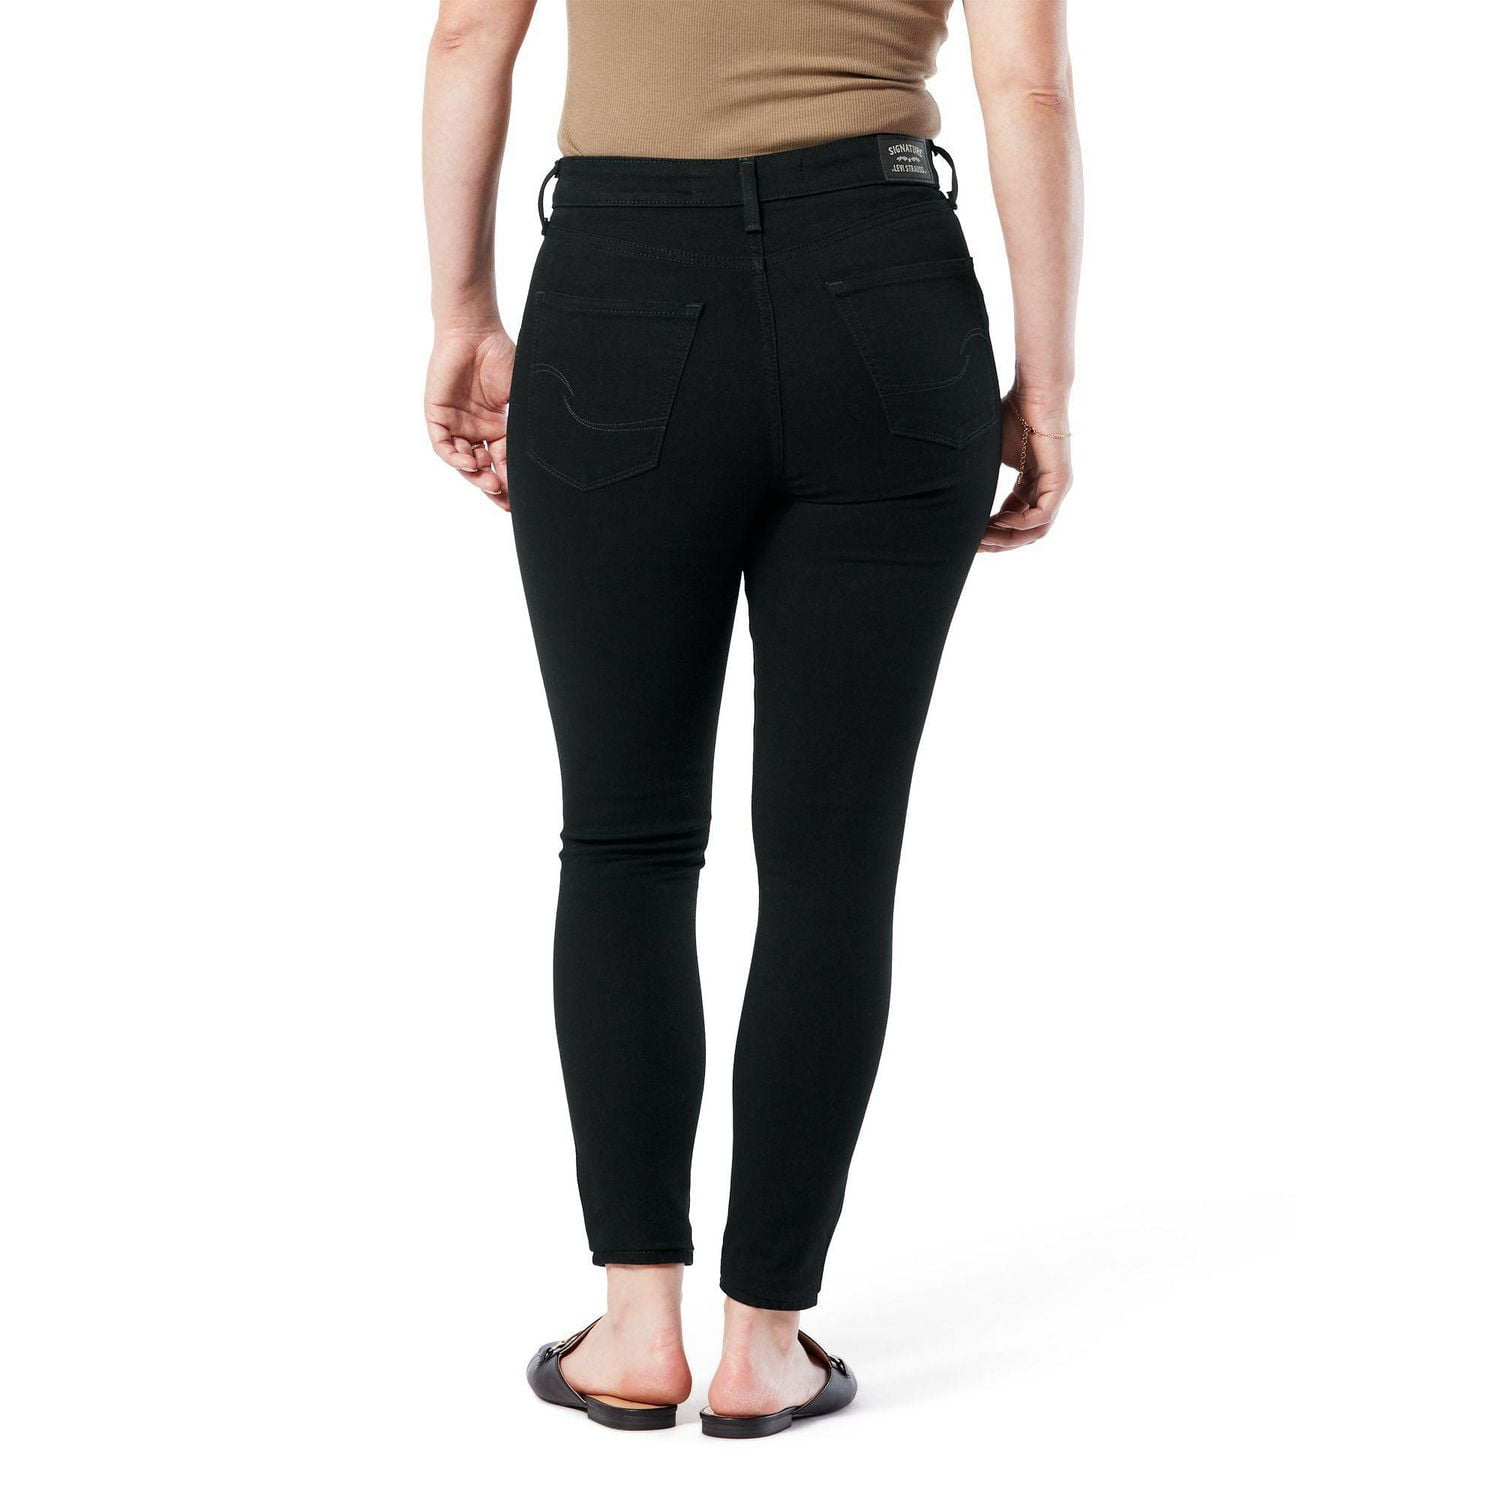  Premium Stretch Soft High Waisted Jeggings For Women